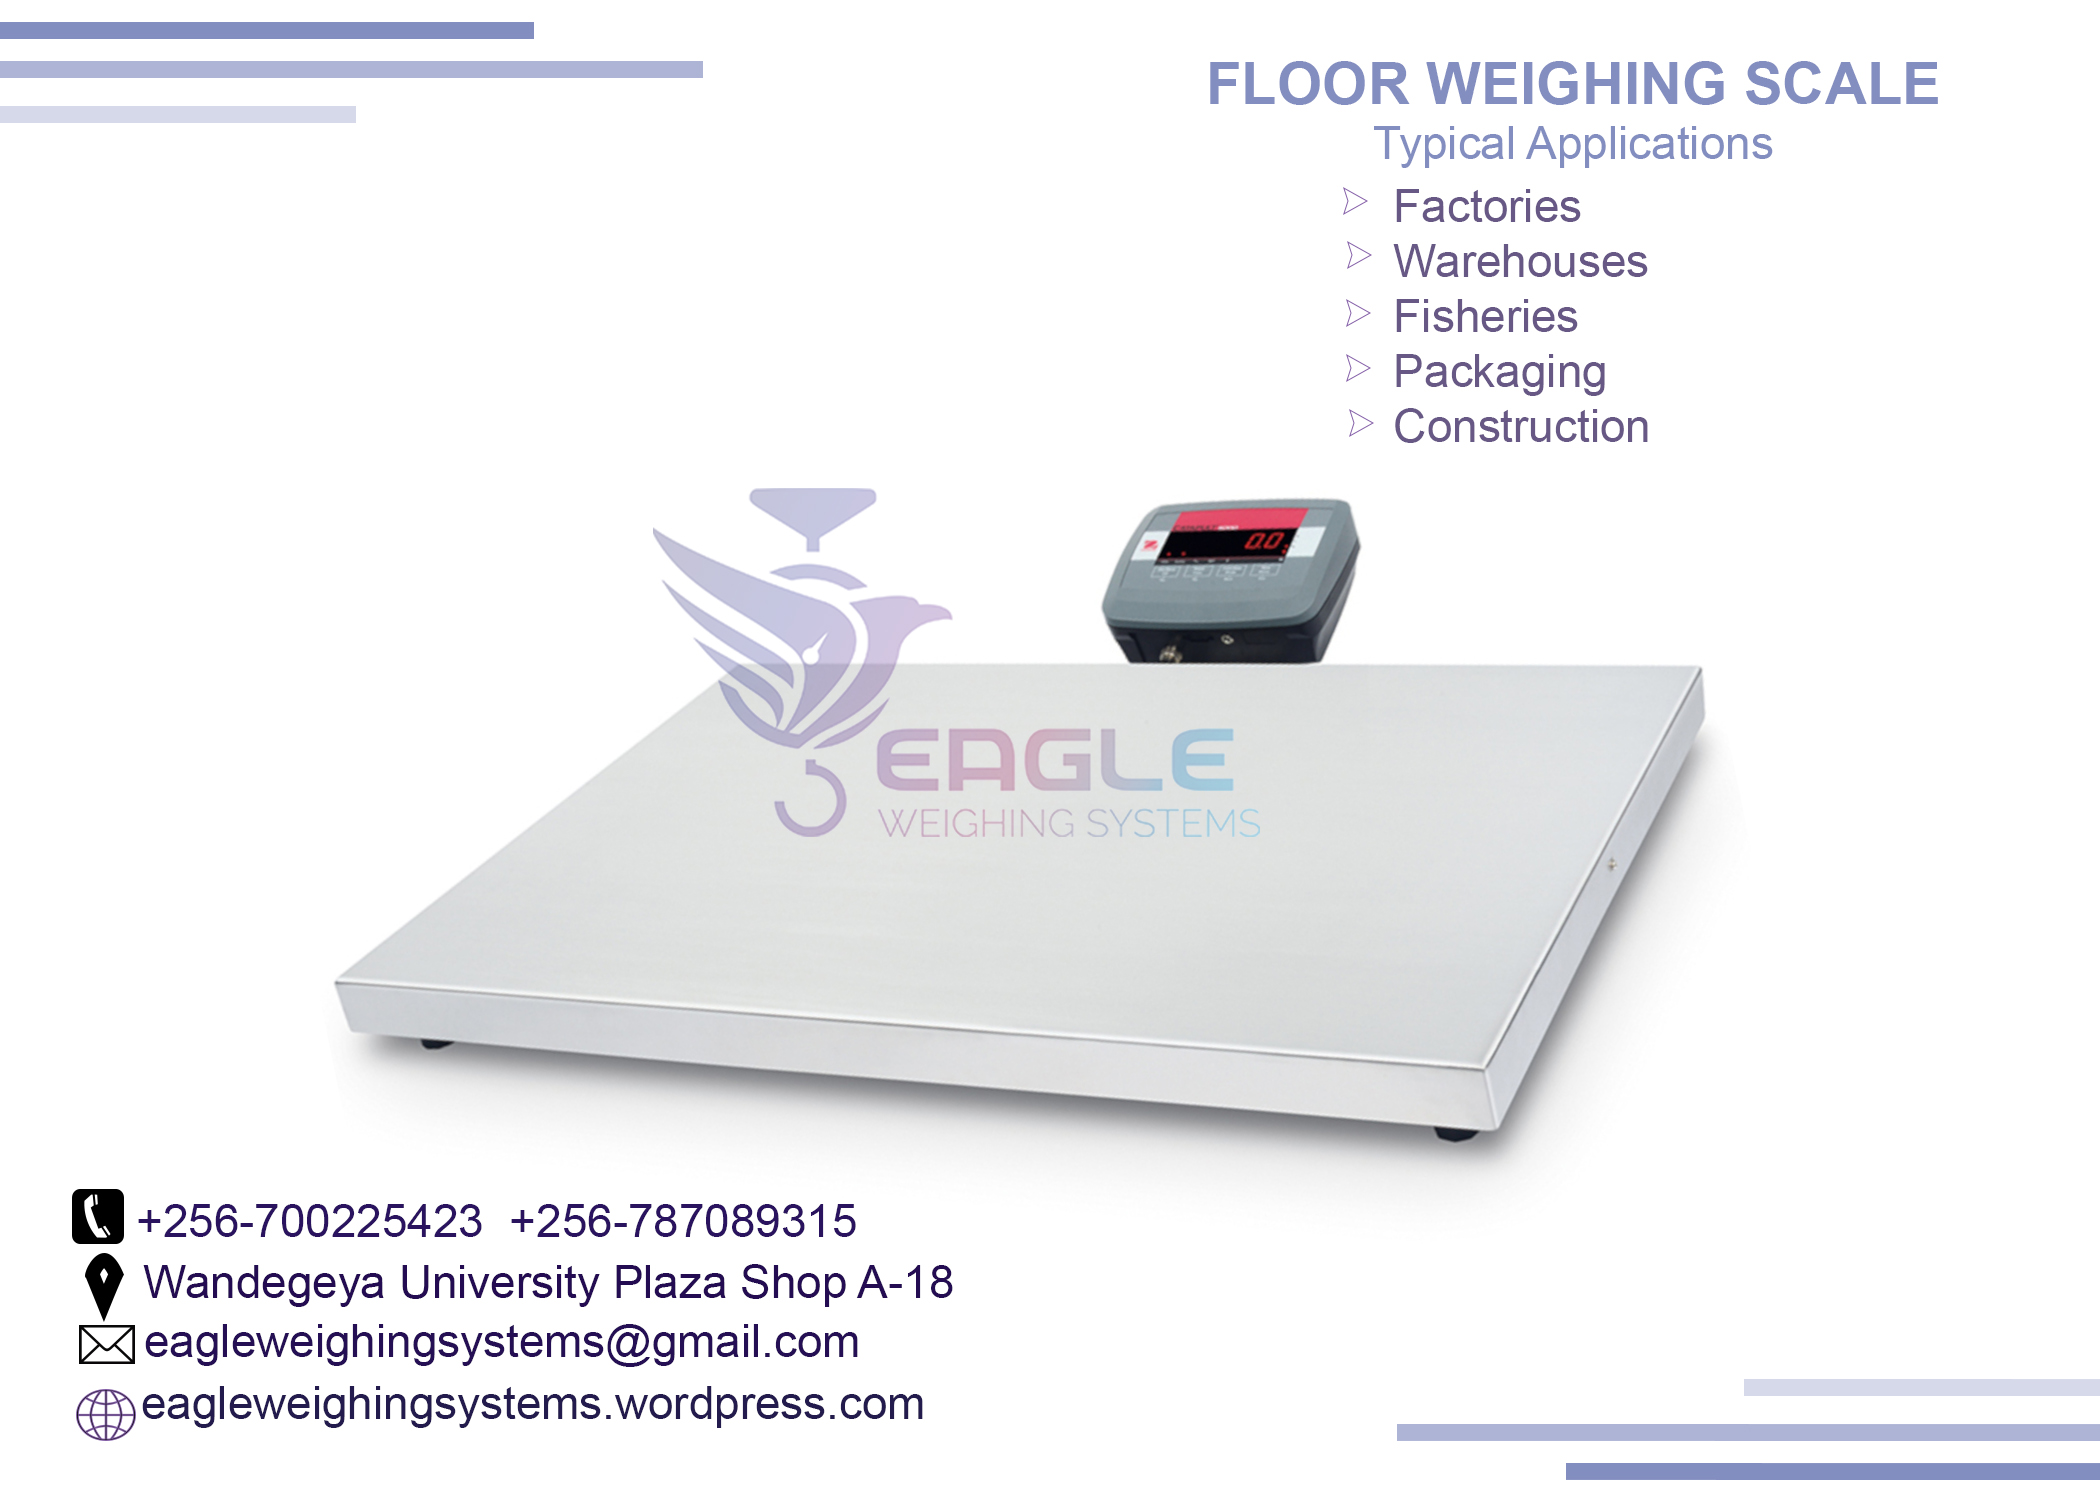 Good quality weighing floor scales in Kampala, Kampala Central Division, Central, Uganda